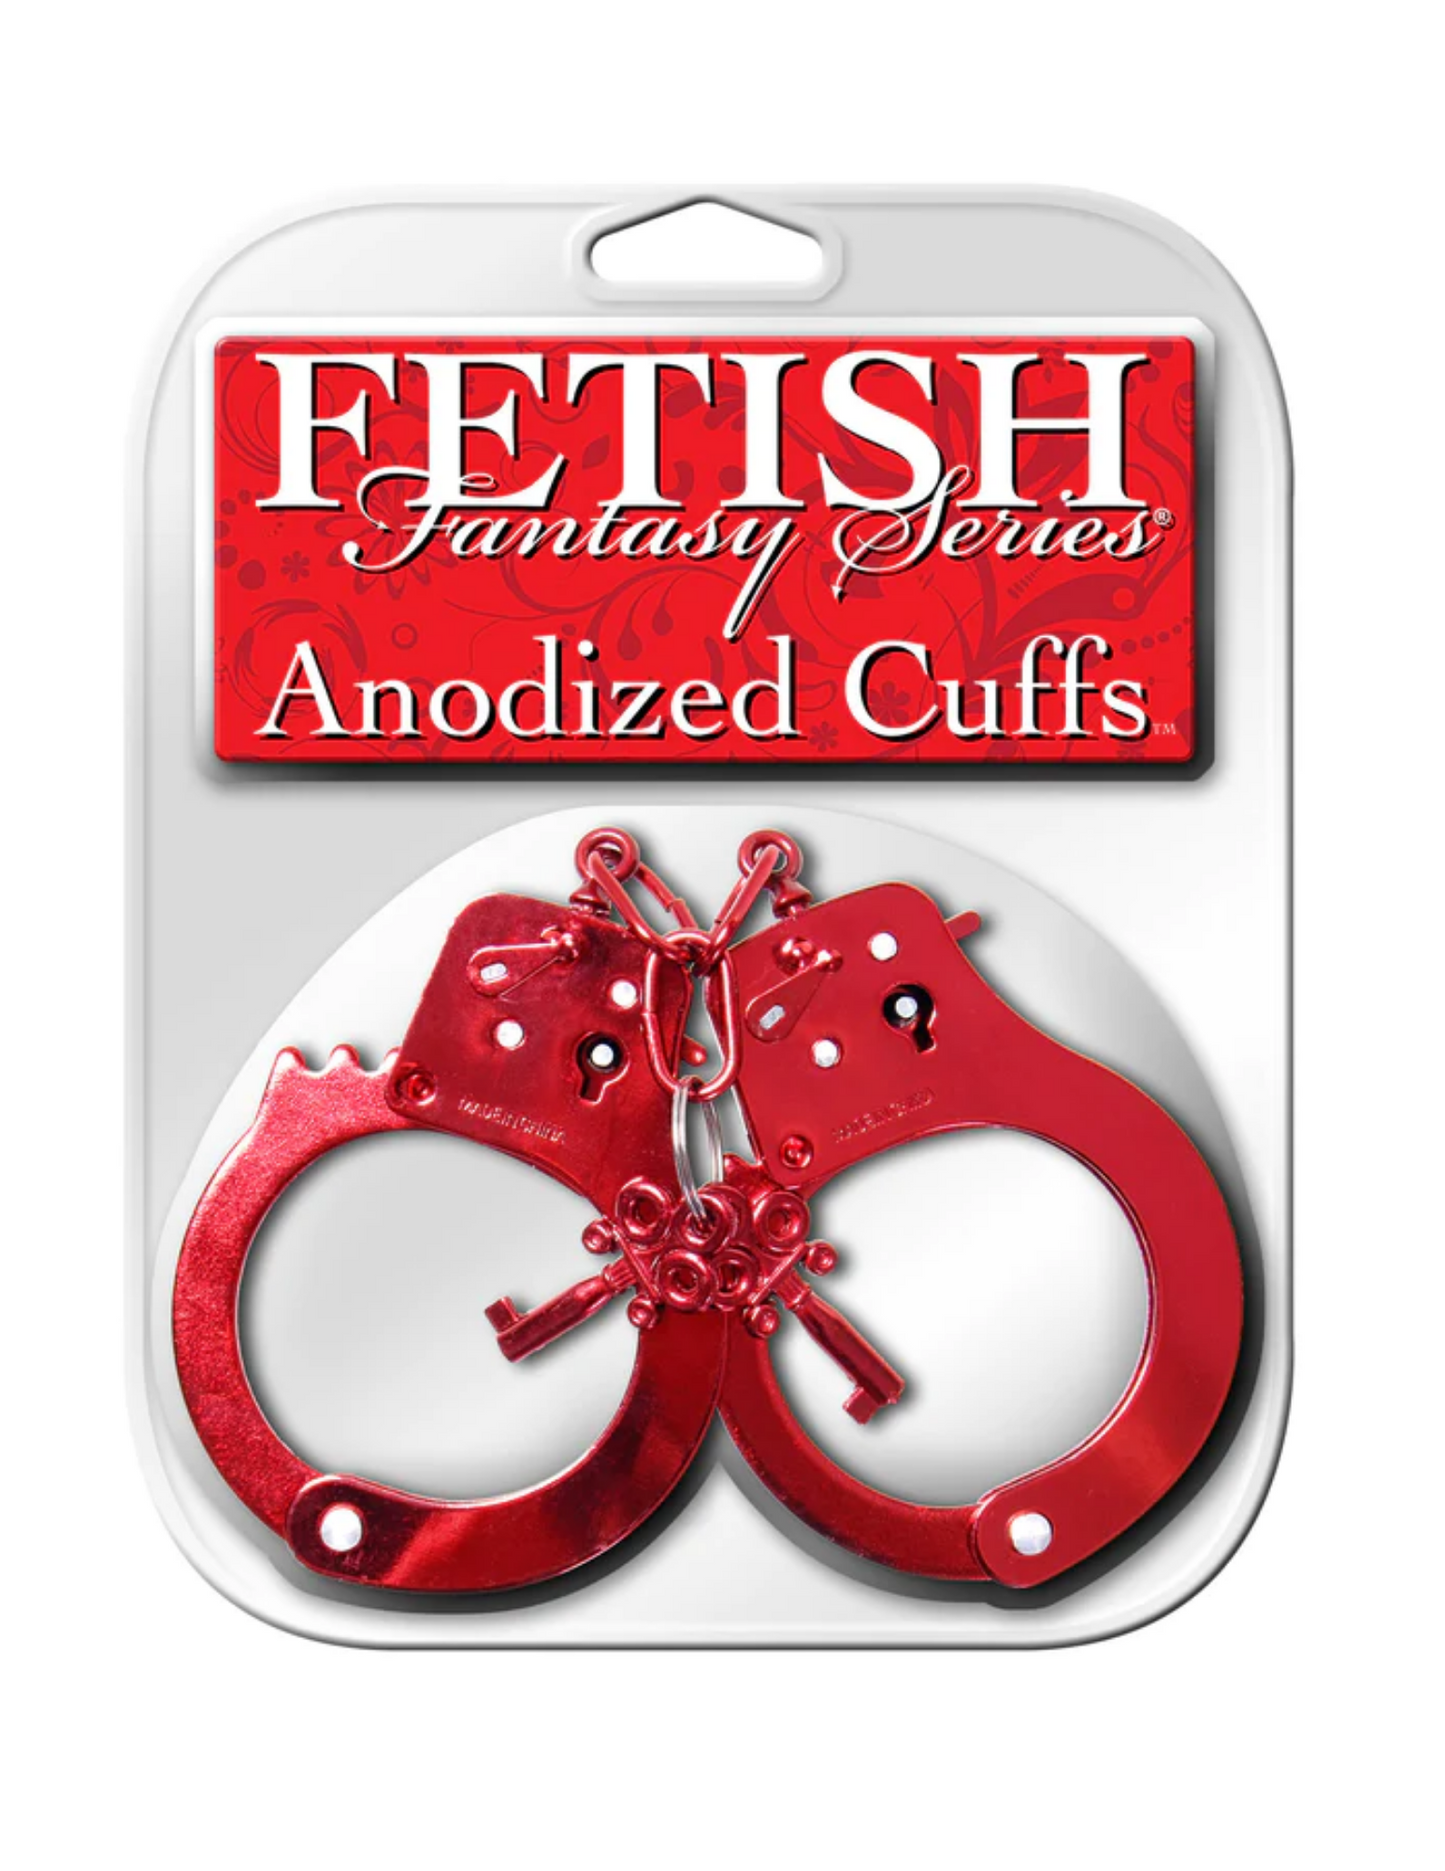 Photo of the Fetish Fantasy Series Anodized Cuffs (metal) from Pipedreams (red) in their package.